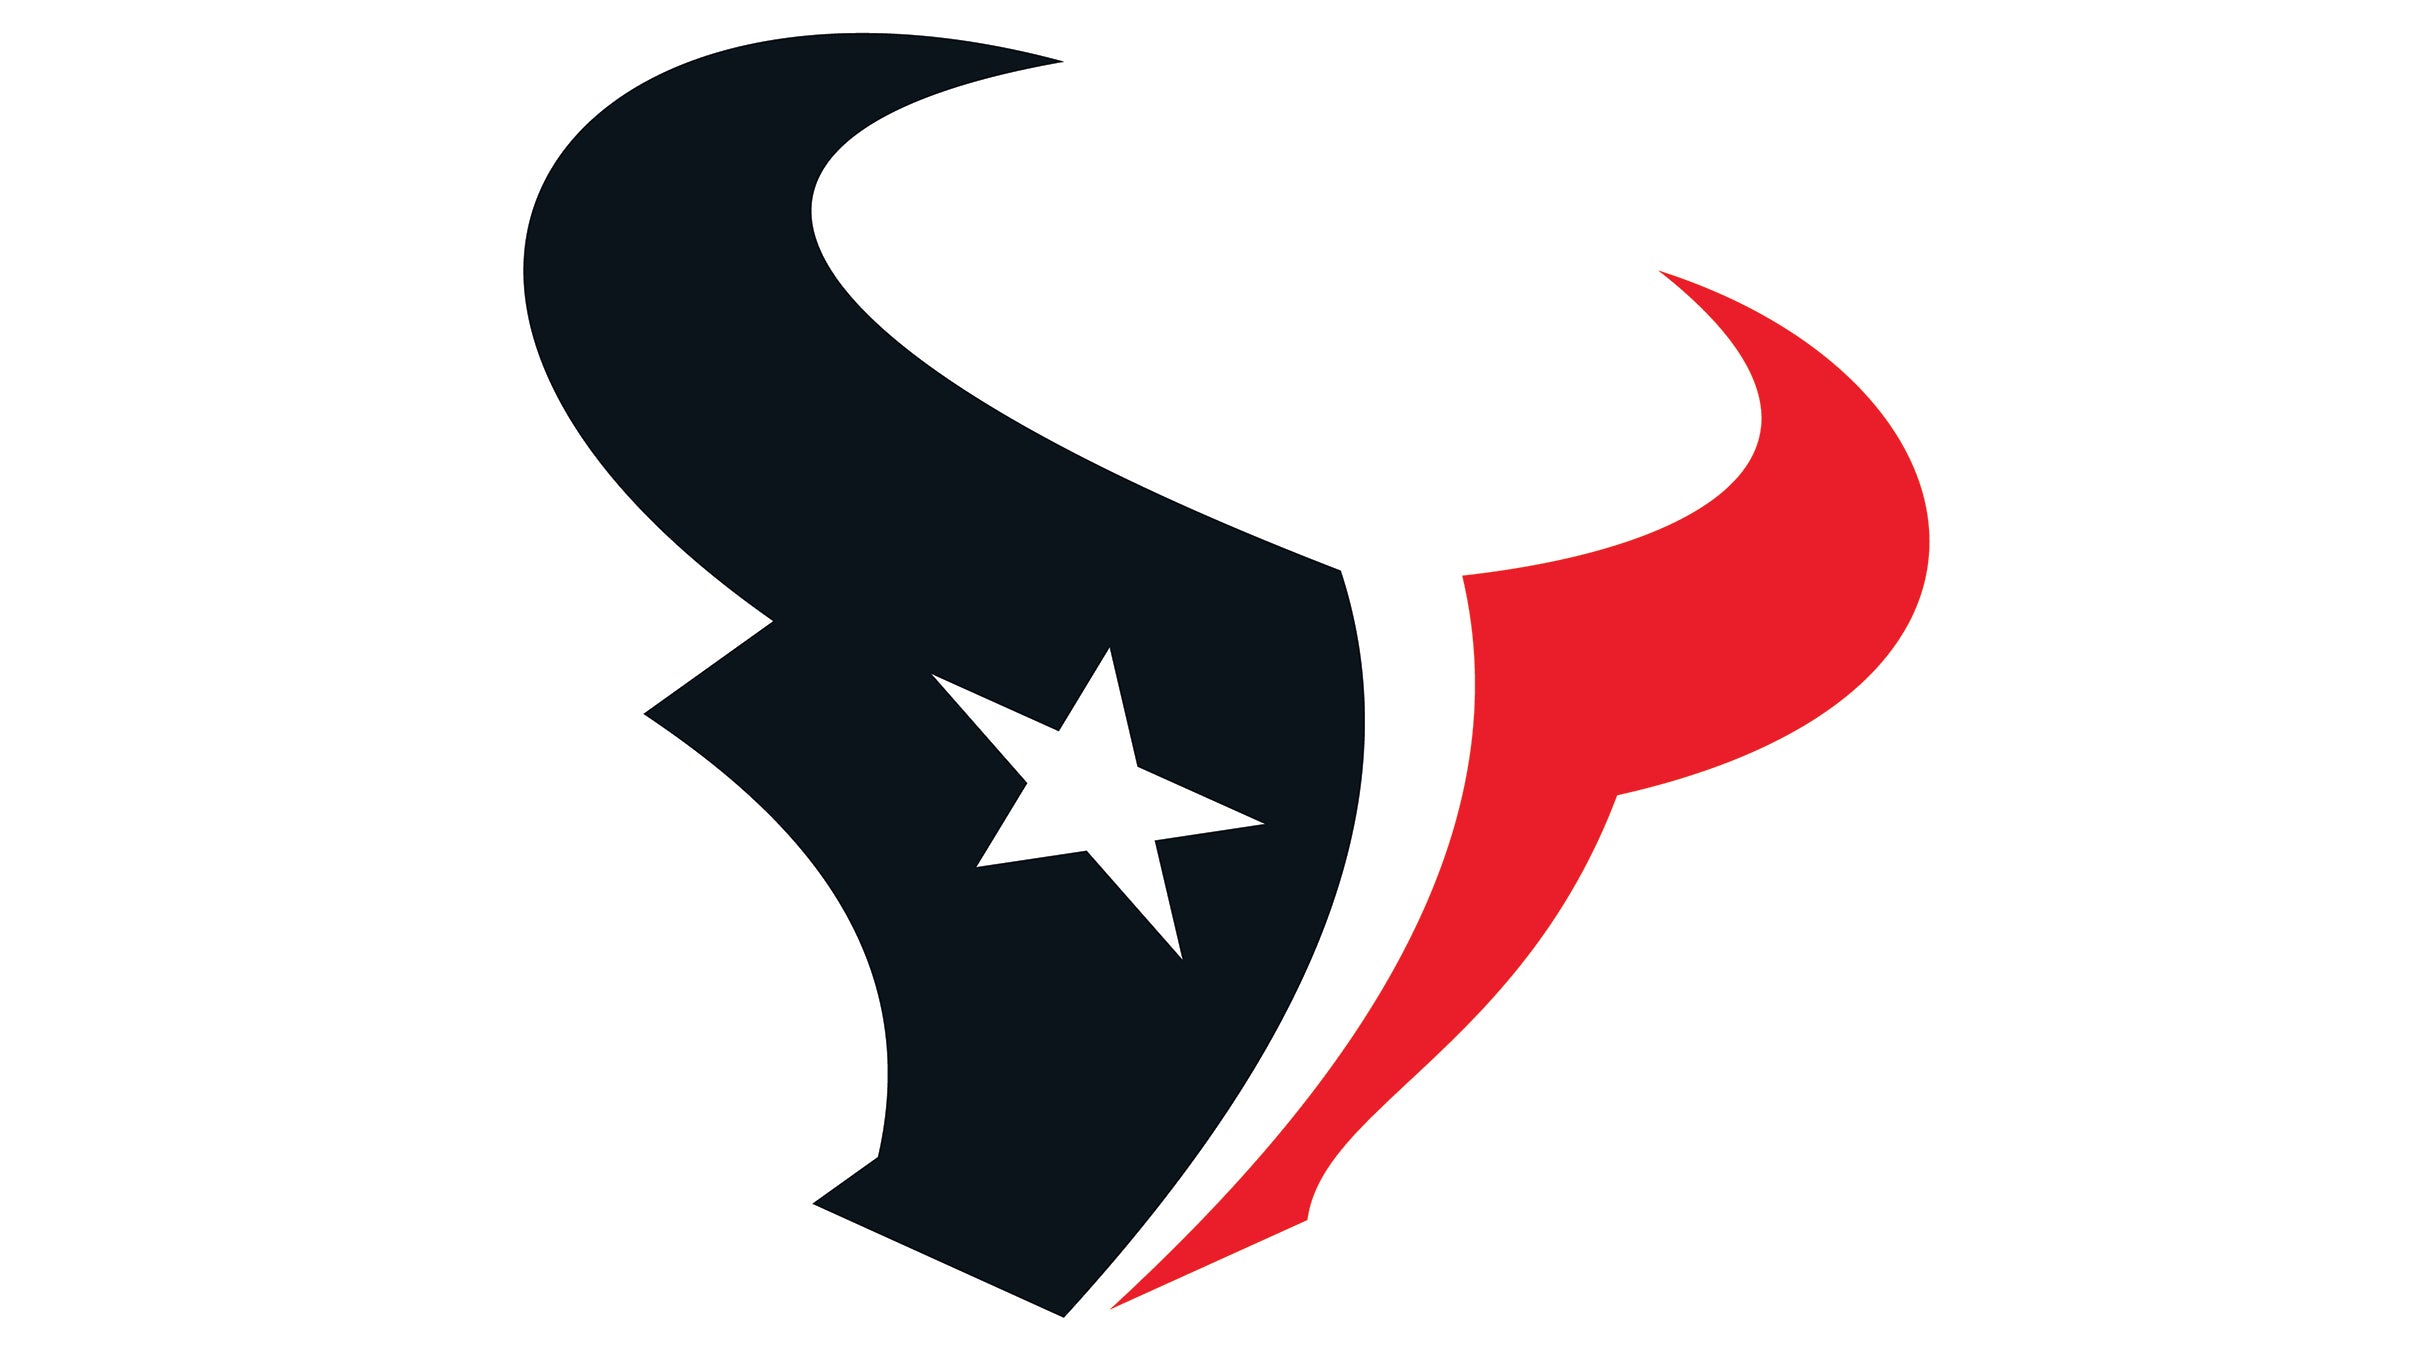 Houston Texans vs. Indianapolis Colts in Houston promo photo for STicketmaster presale offer code